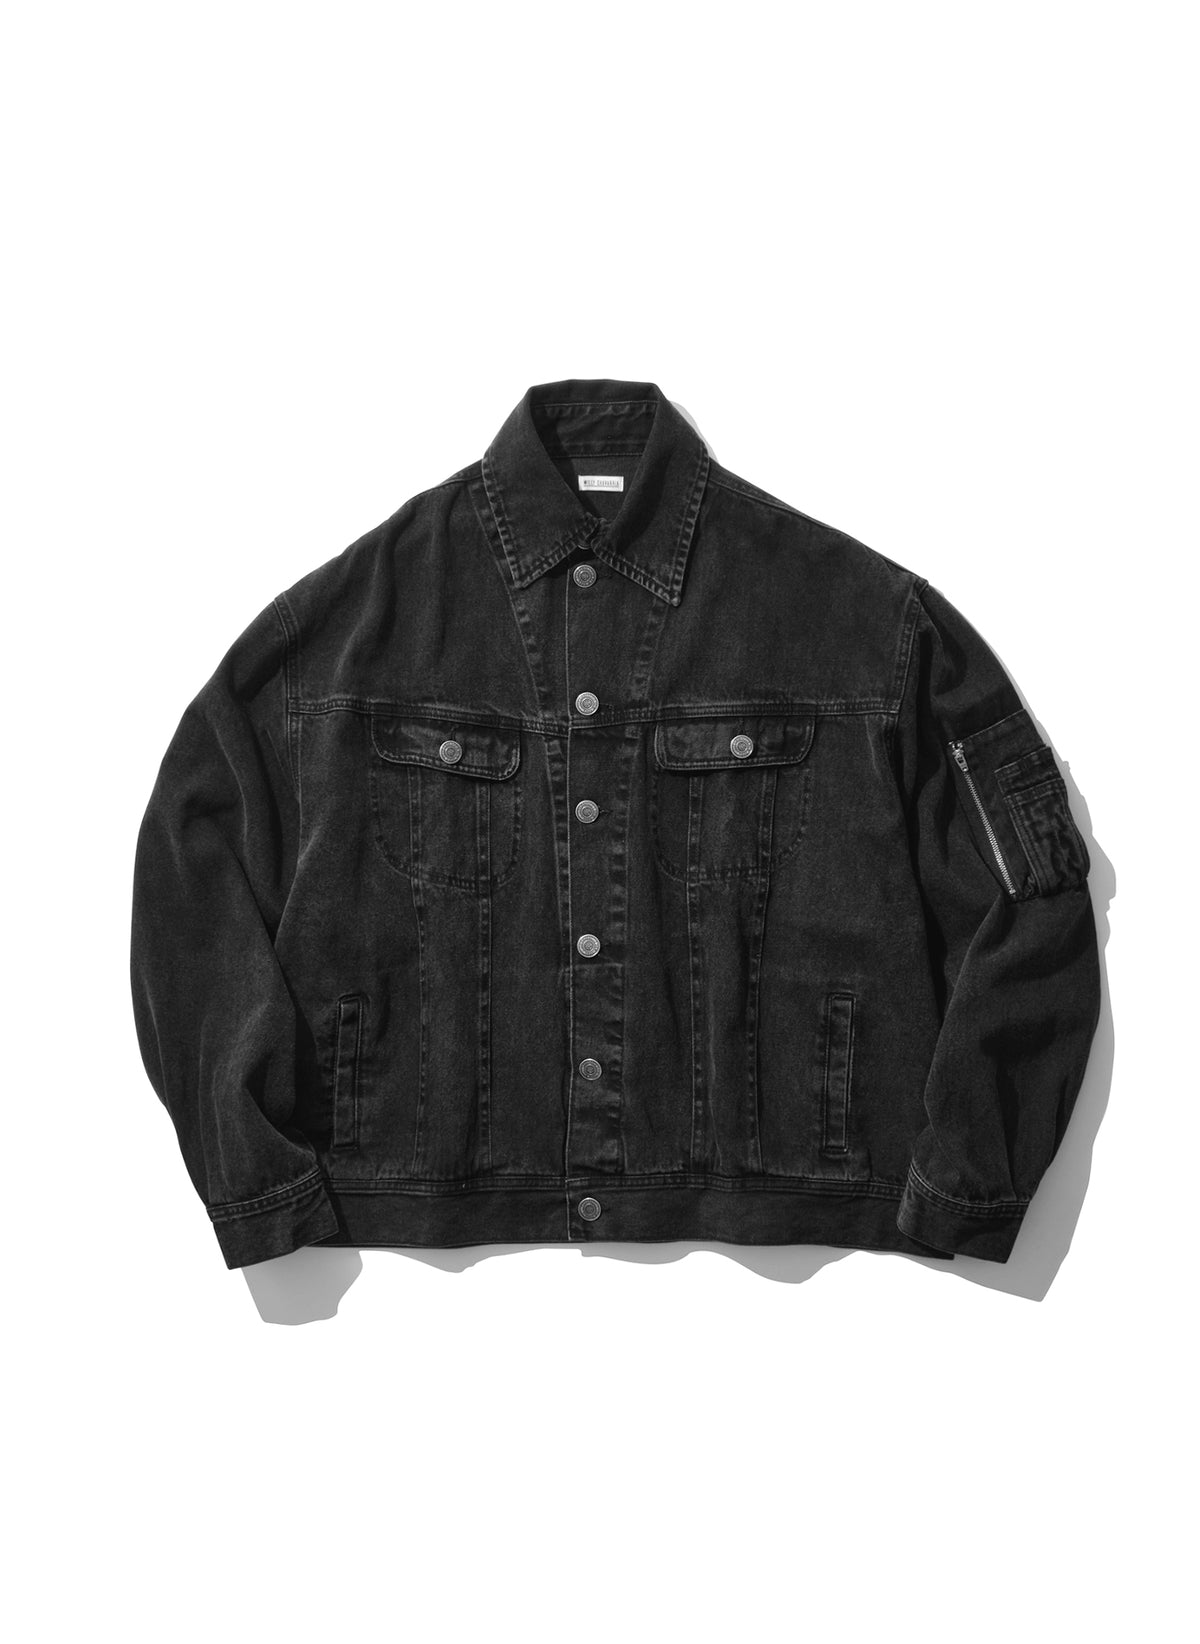 <span style="color: #f50b0b;">Last One</span> WILLY CHAVARRIA / CHACHI TRUCKER CIGARRETTE POCKET JACKET WASHED BLACK